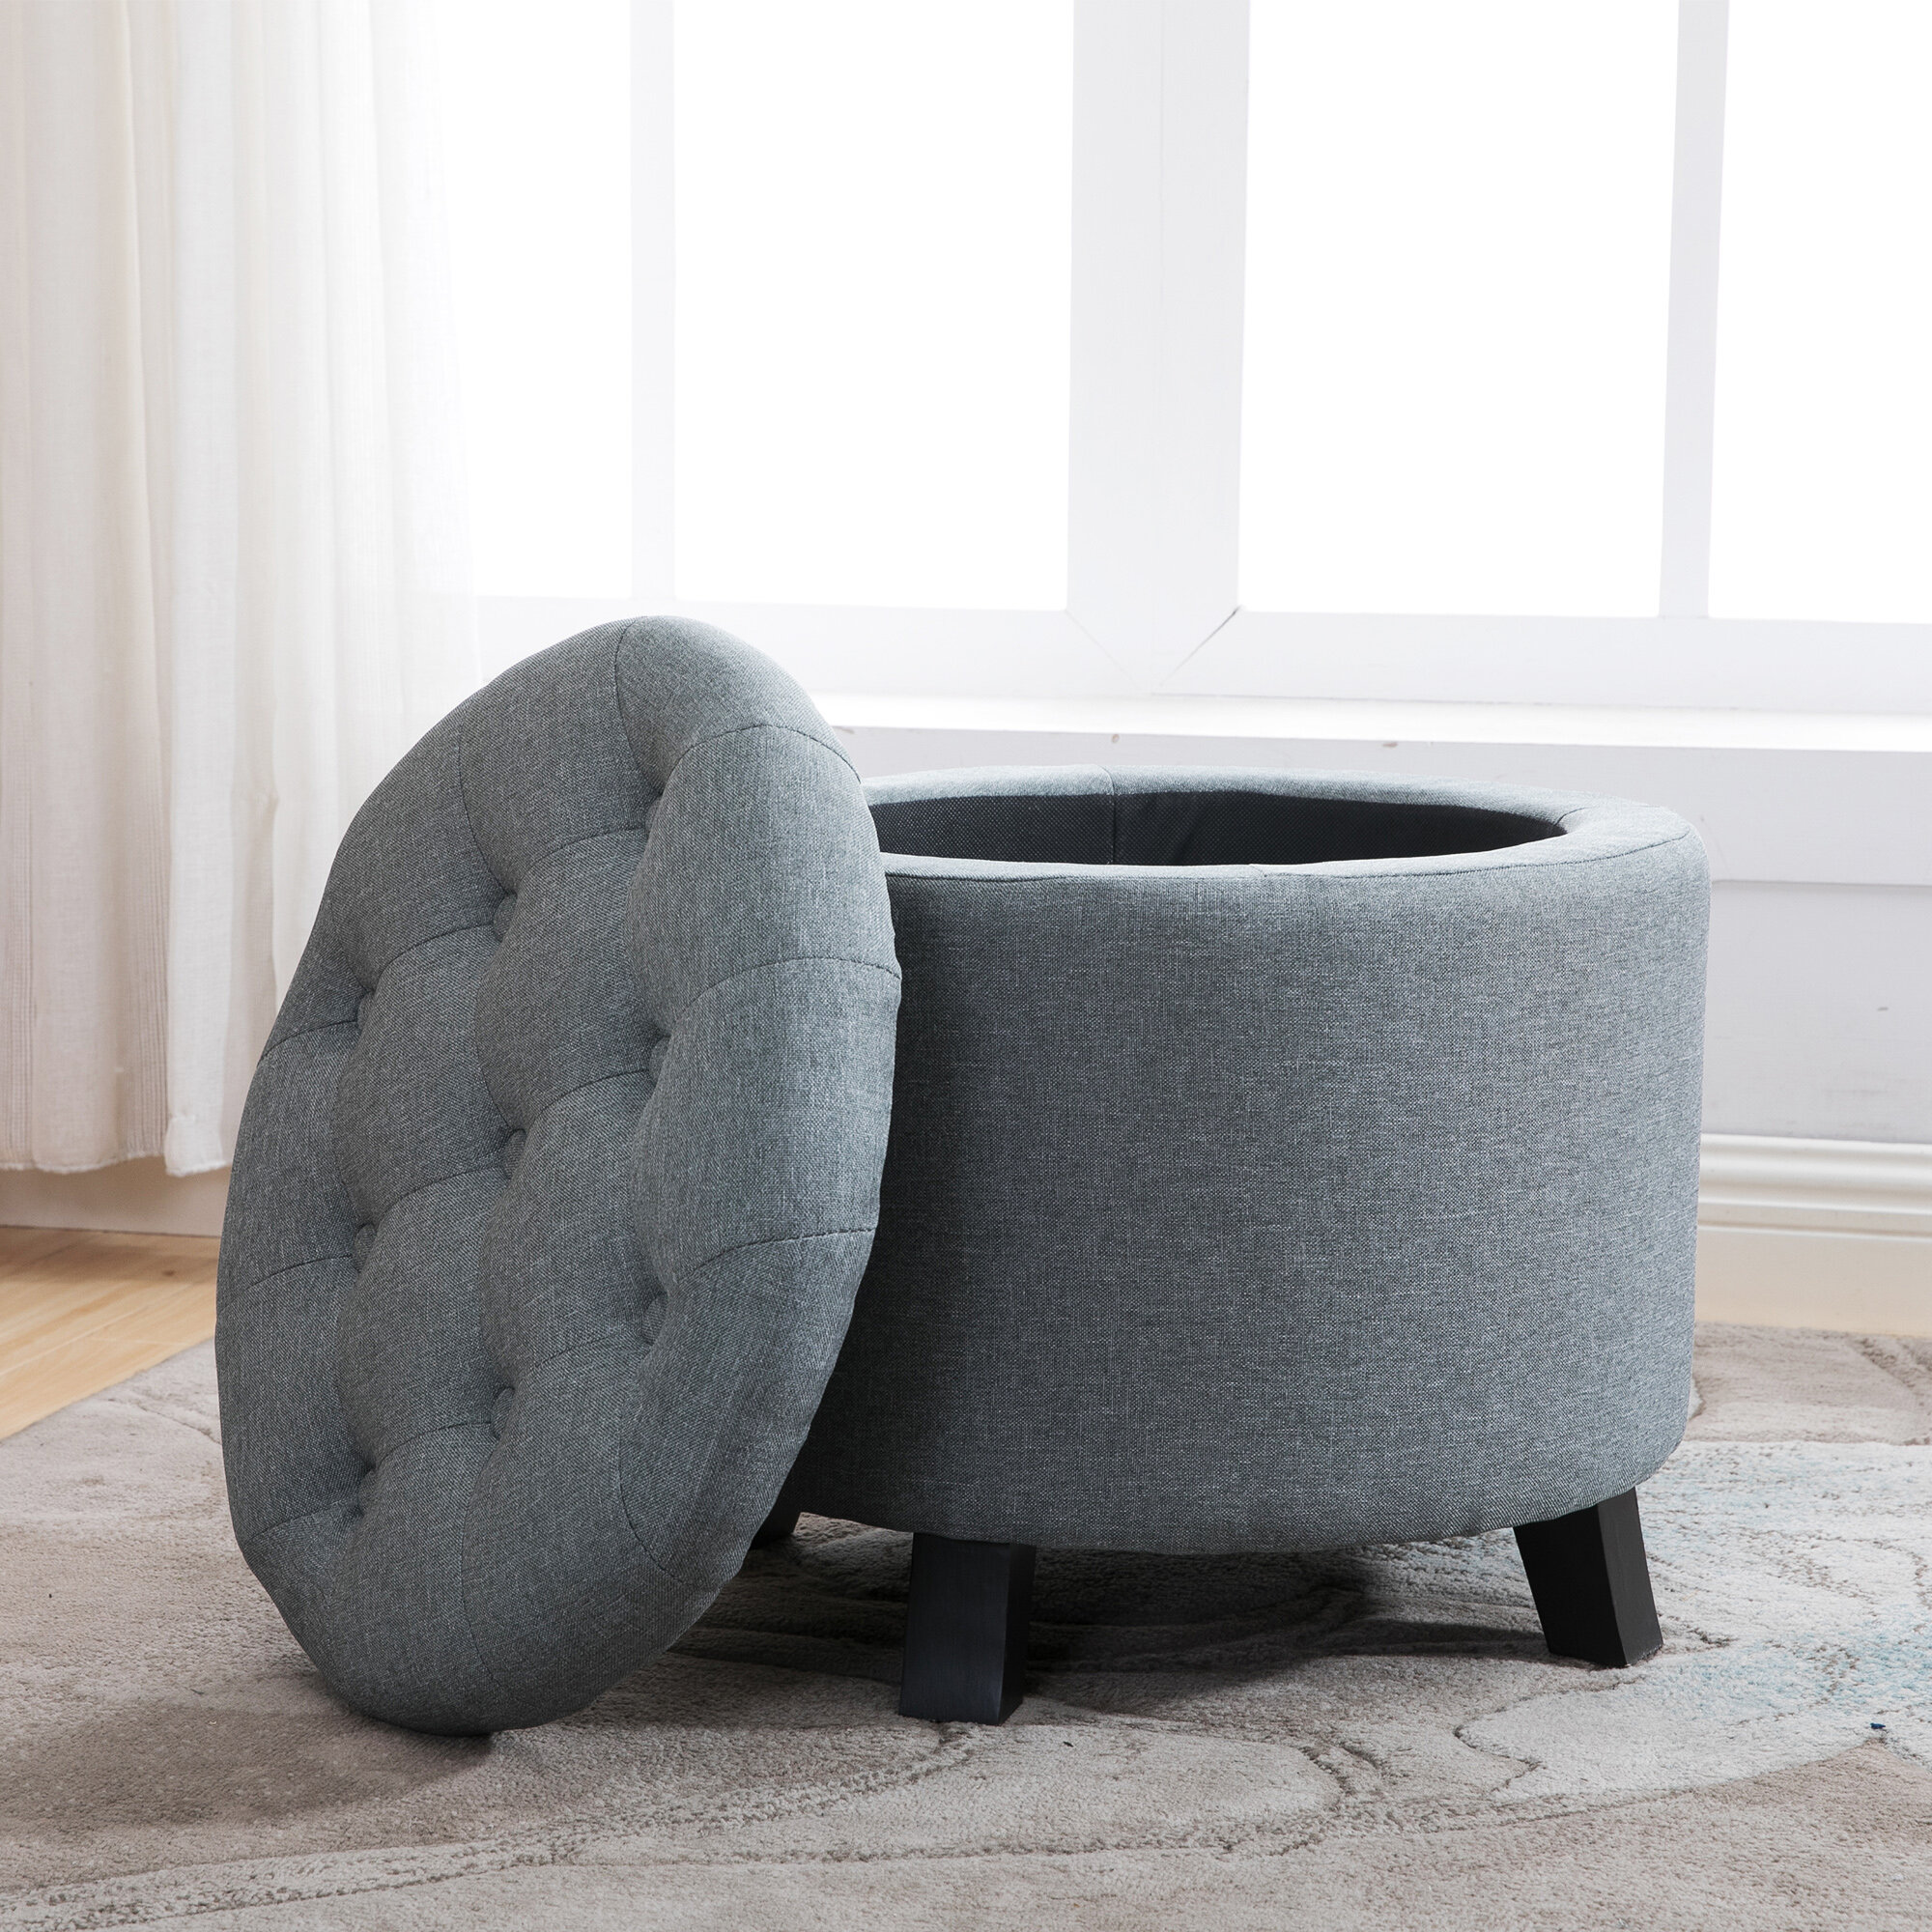 [BIG SALE] Ottomans & Poufs from $25 You’ll Love In 2020 | Wayfair